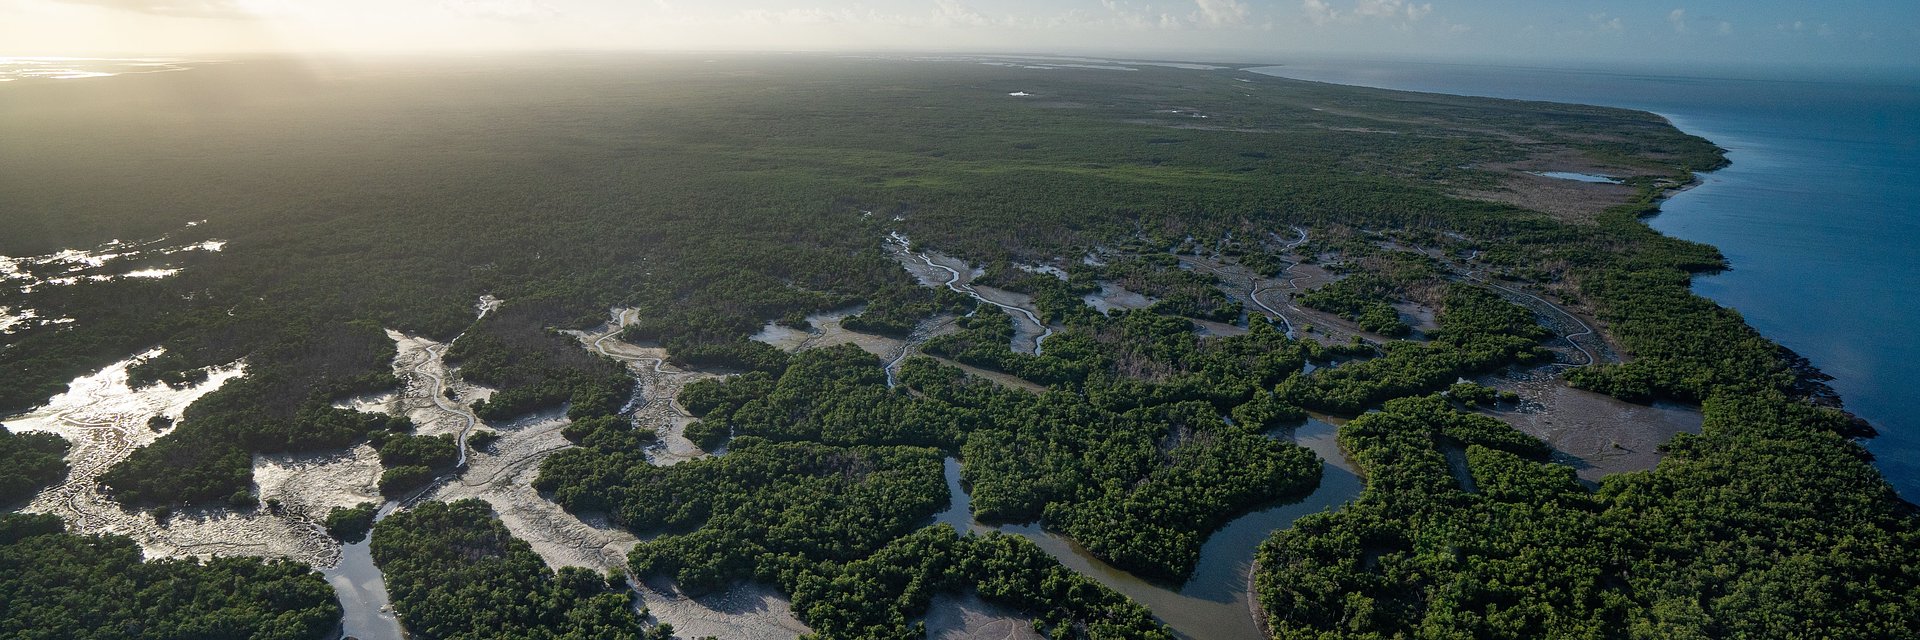 Outdoor industry unified for Everglades restoration funding.